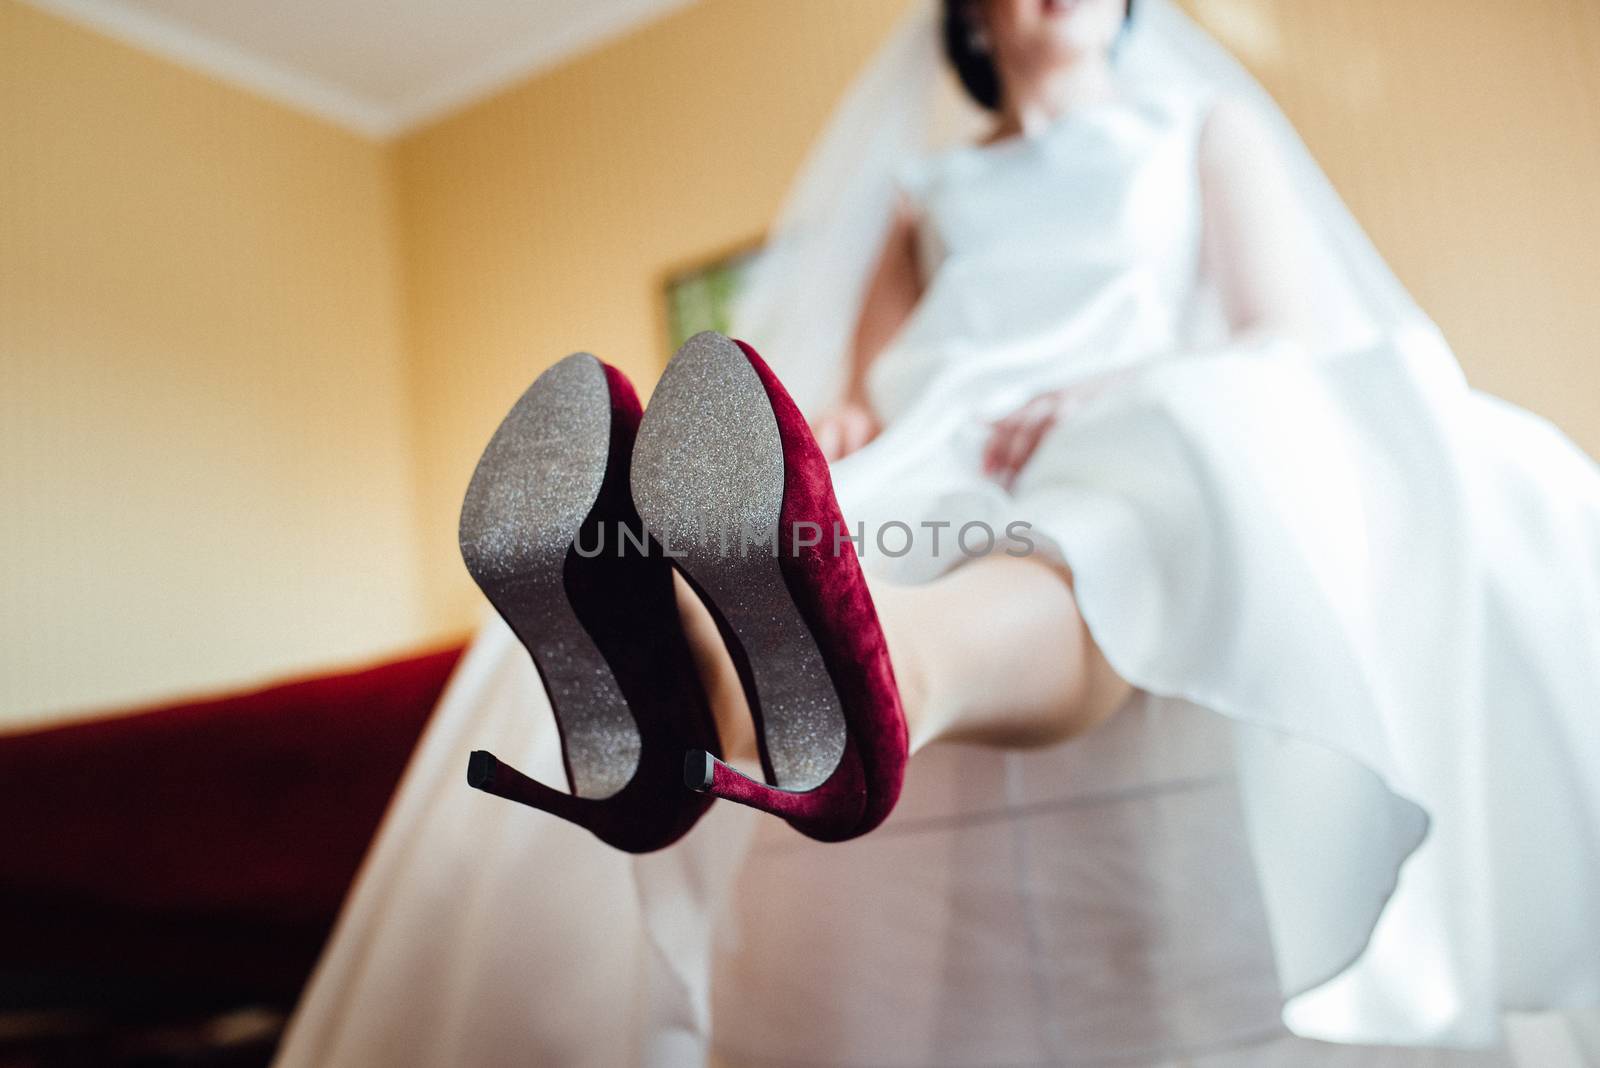 wedding shoes of the bride, beautiful fashion by Andreua